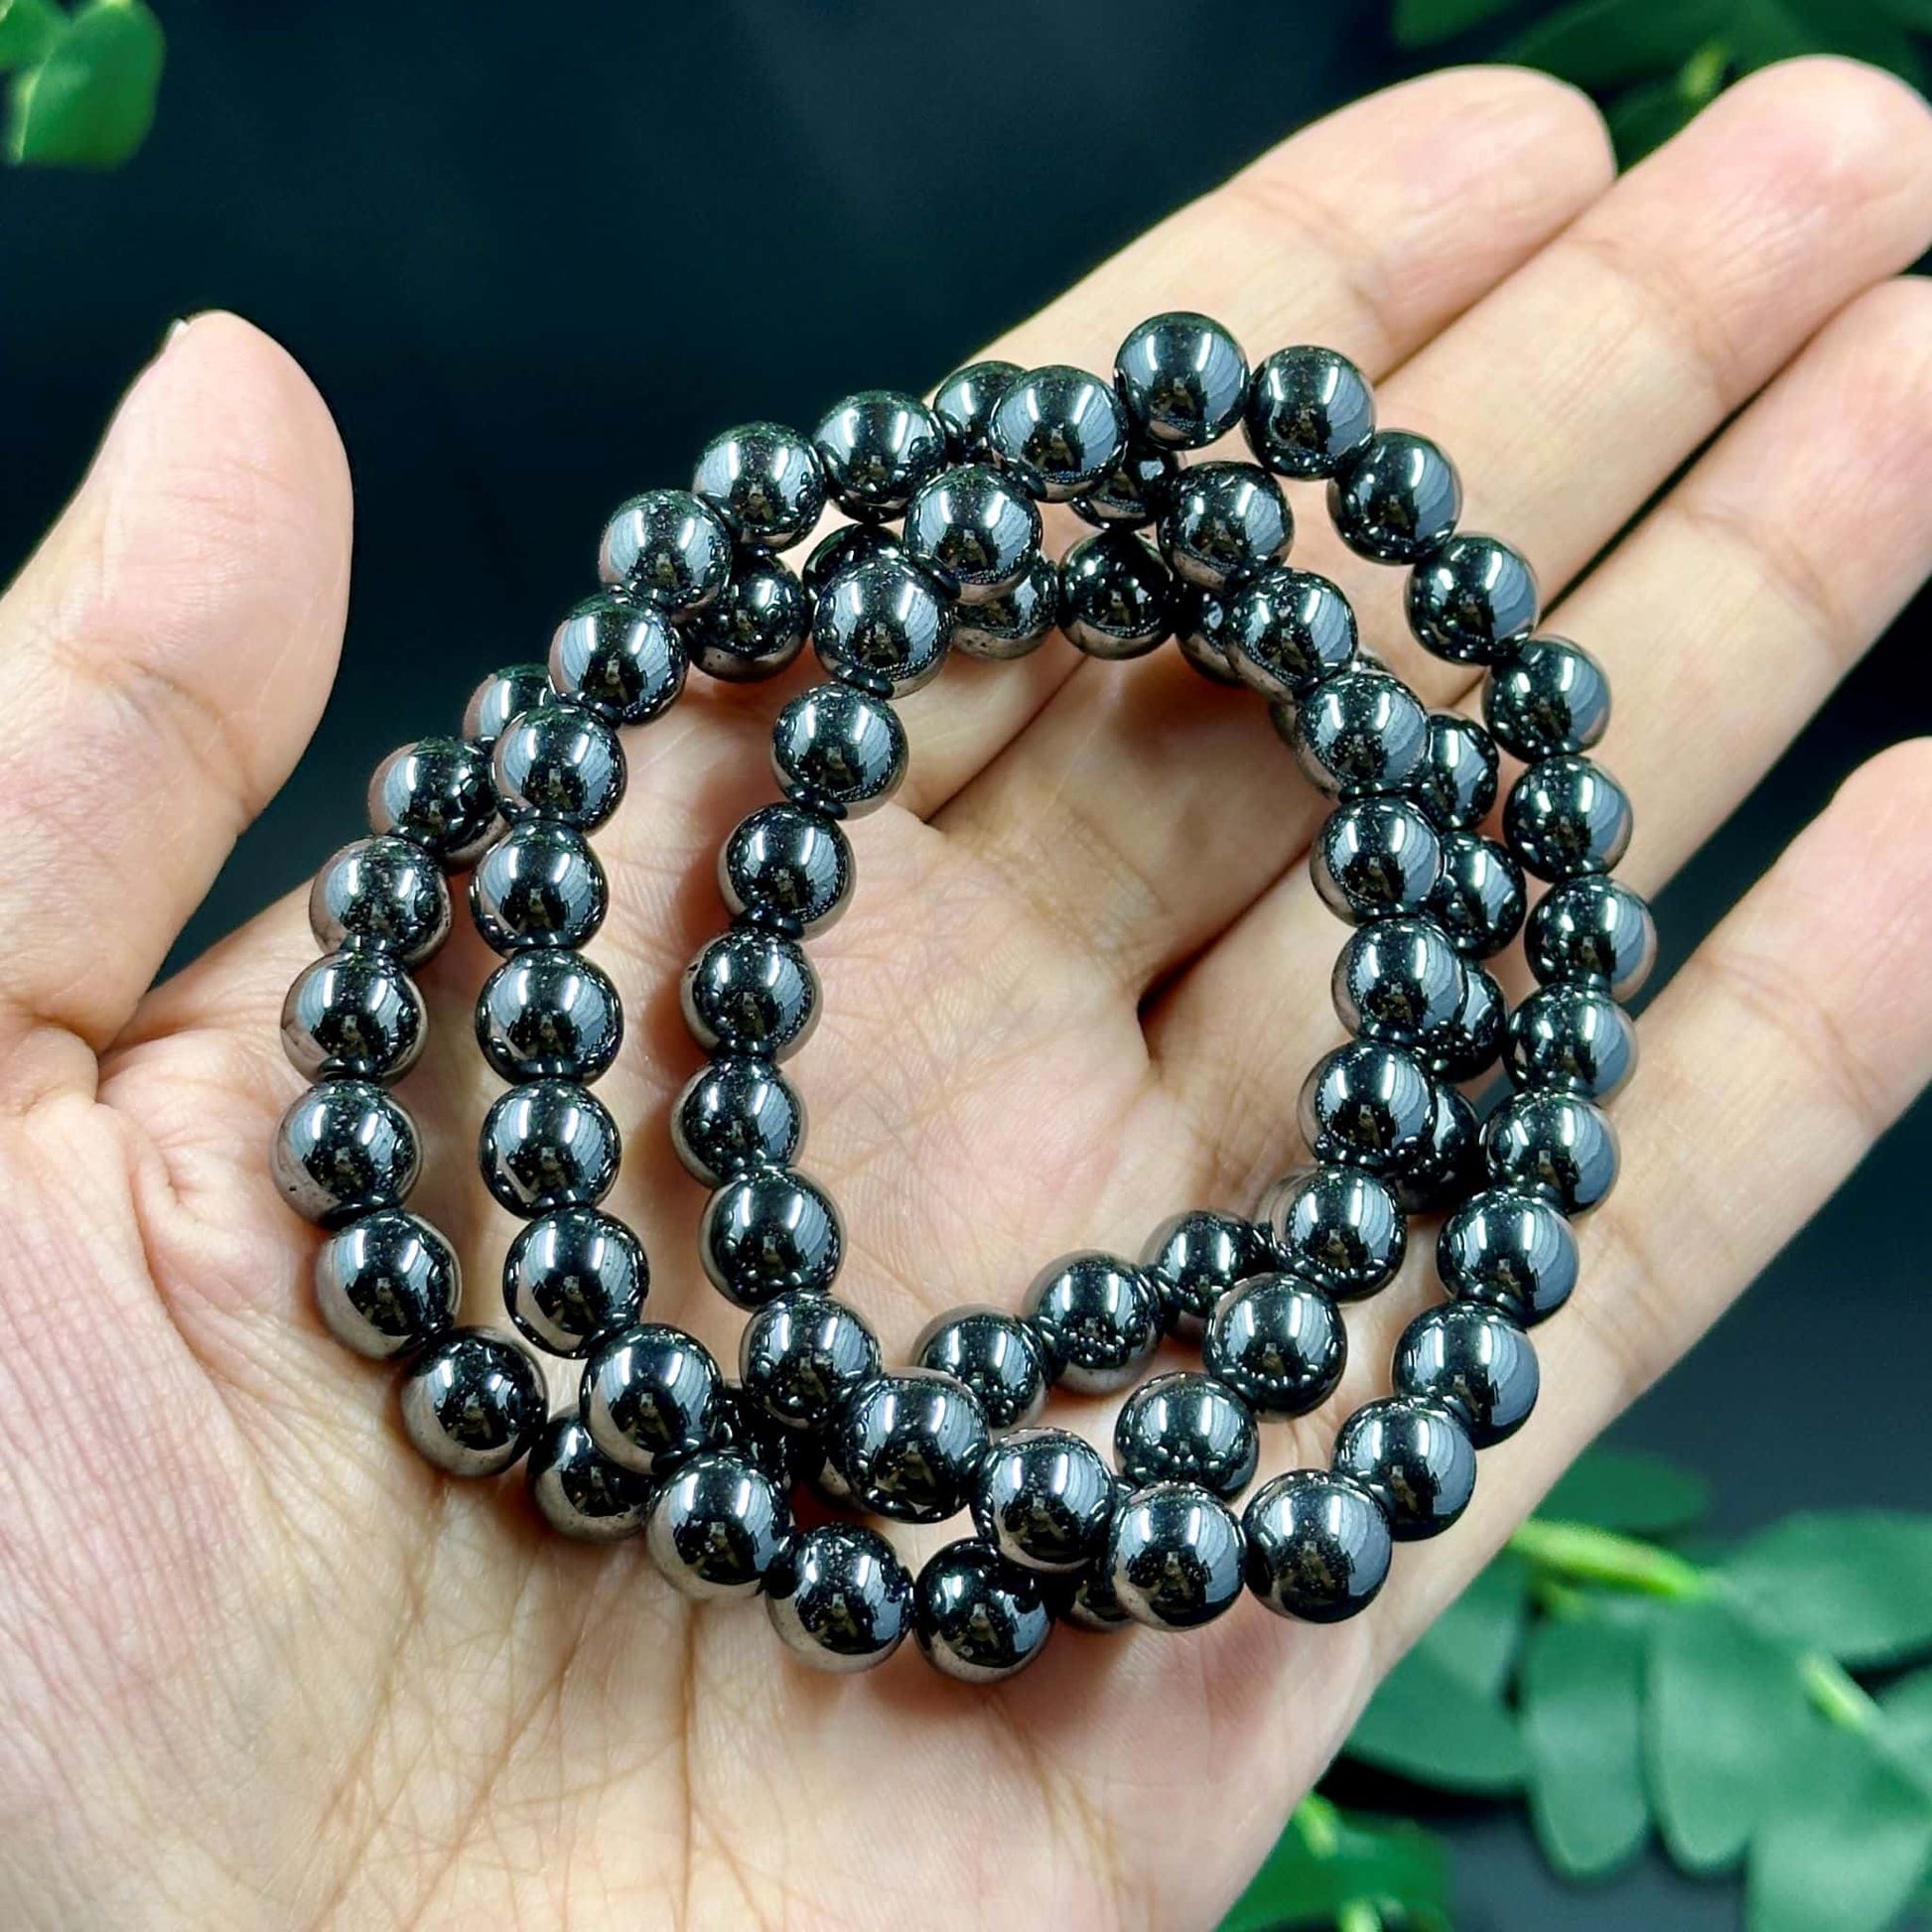 Hematite Crystal Bracelet, 8mm, 7.5 inches - Itsy's Crystal Cove LLC